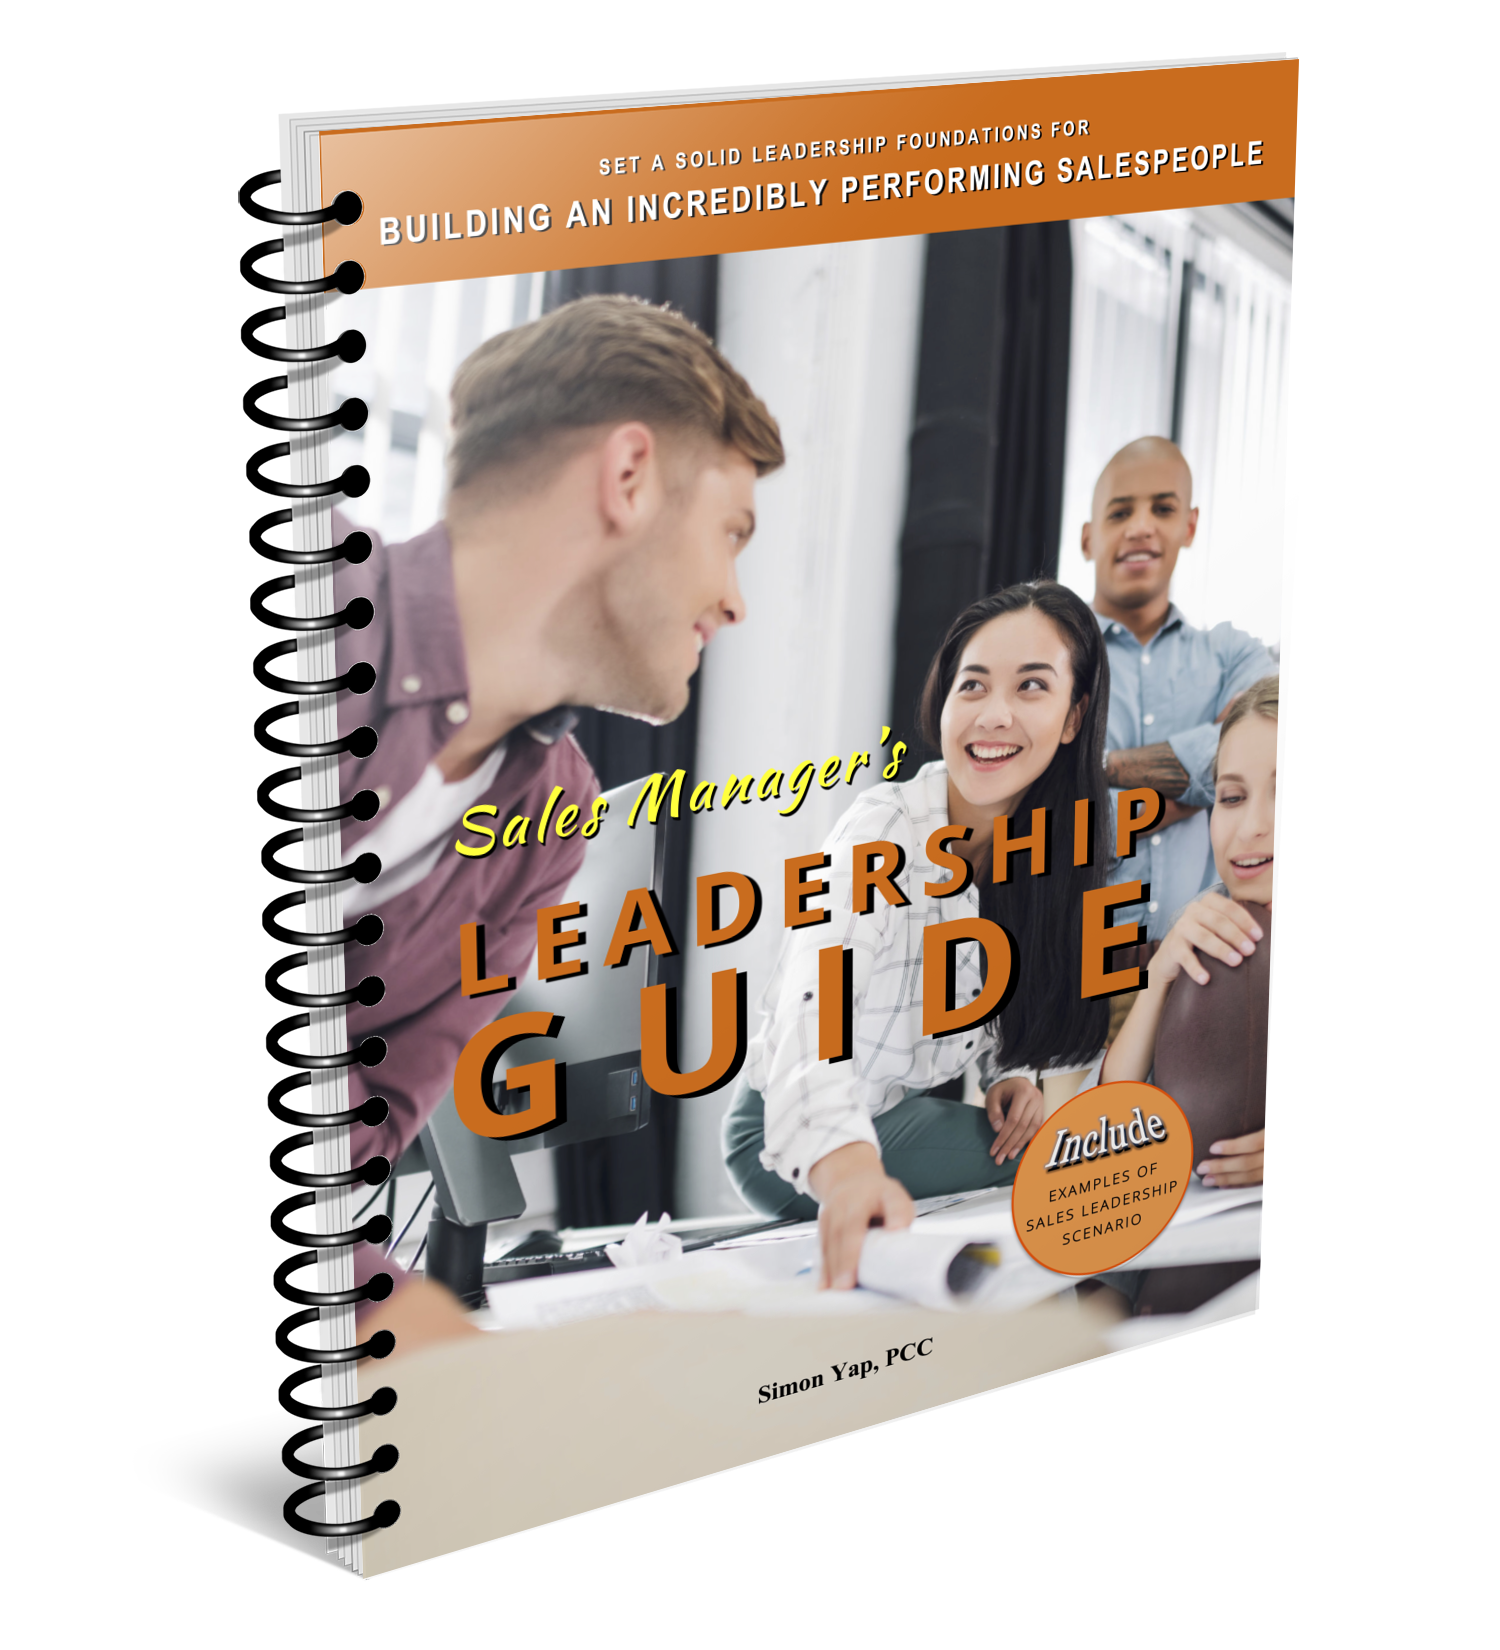 Leadership Guide for Sales Managers